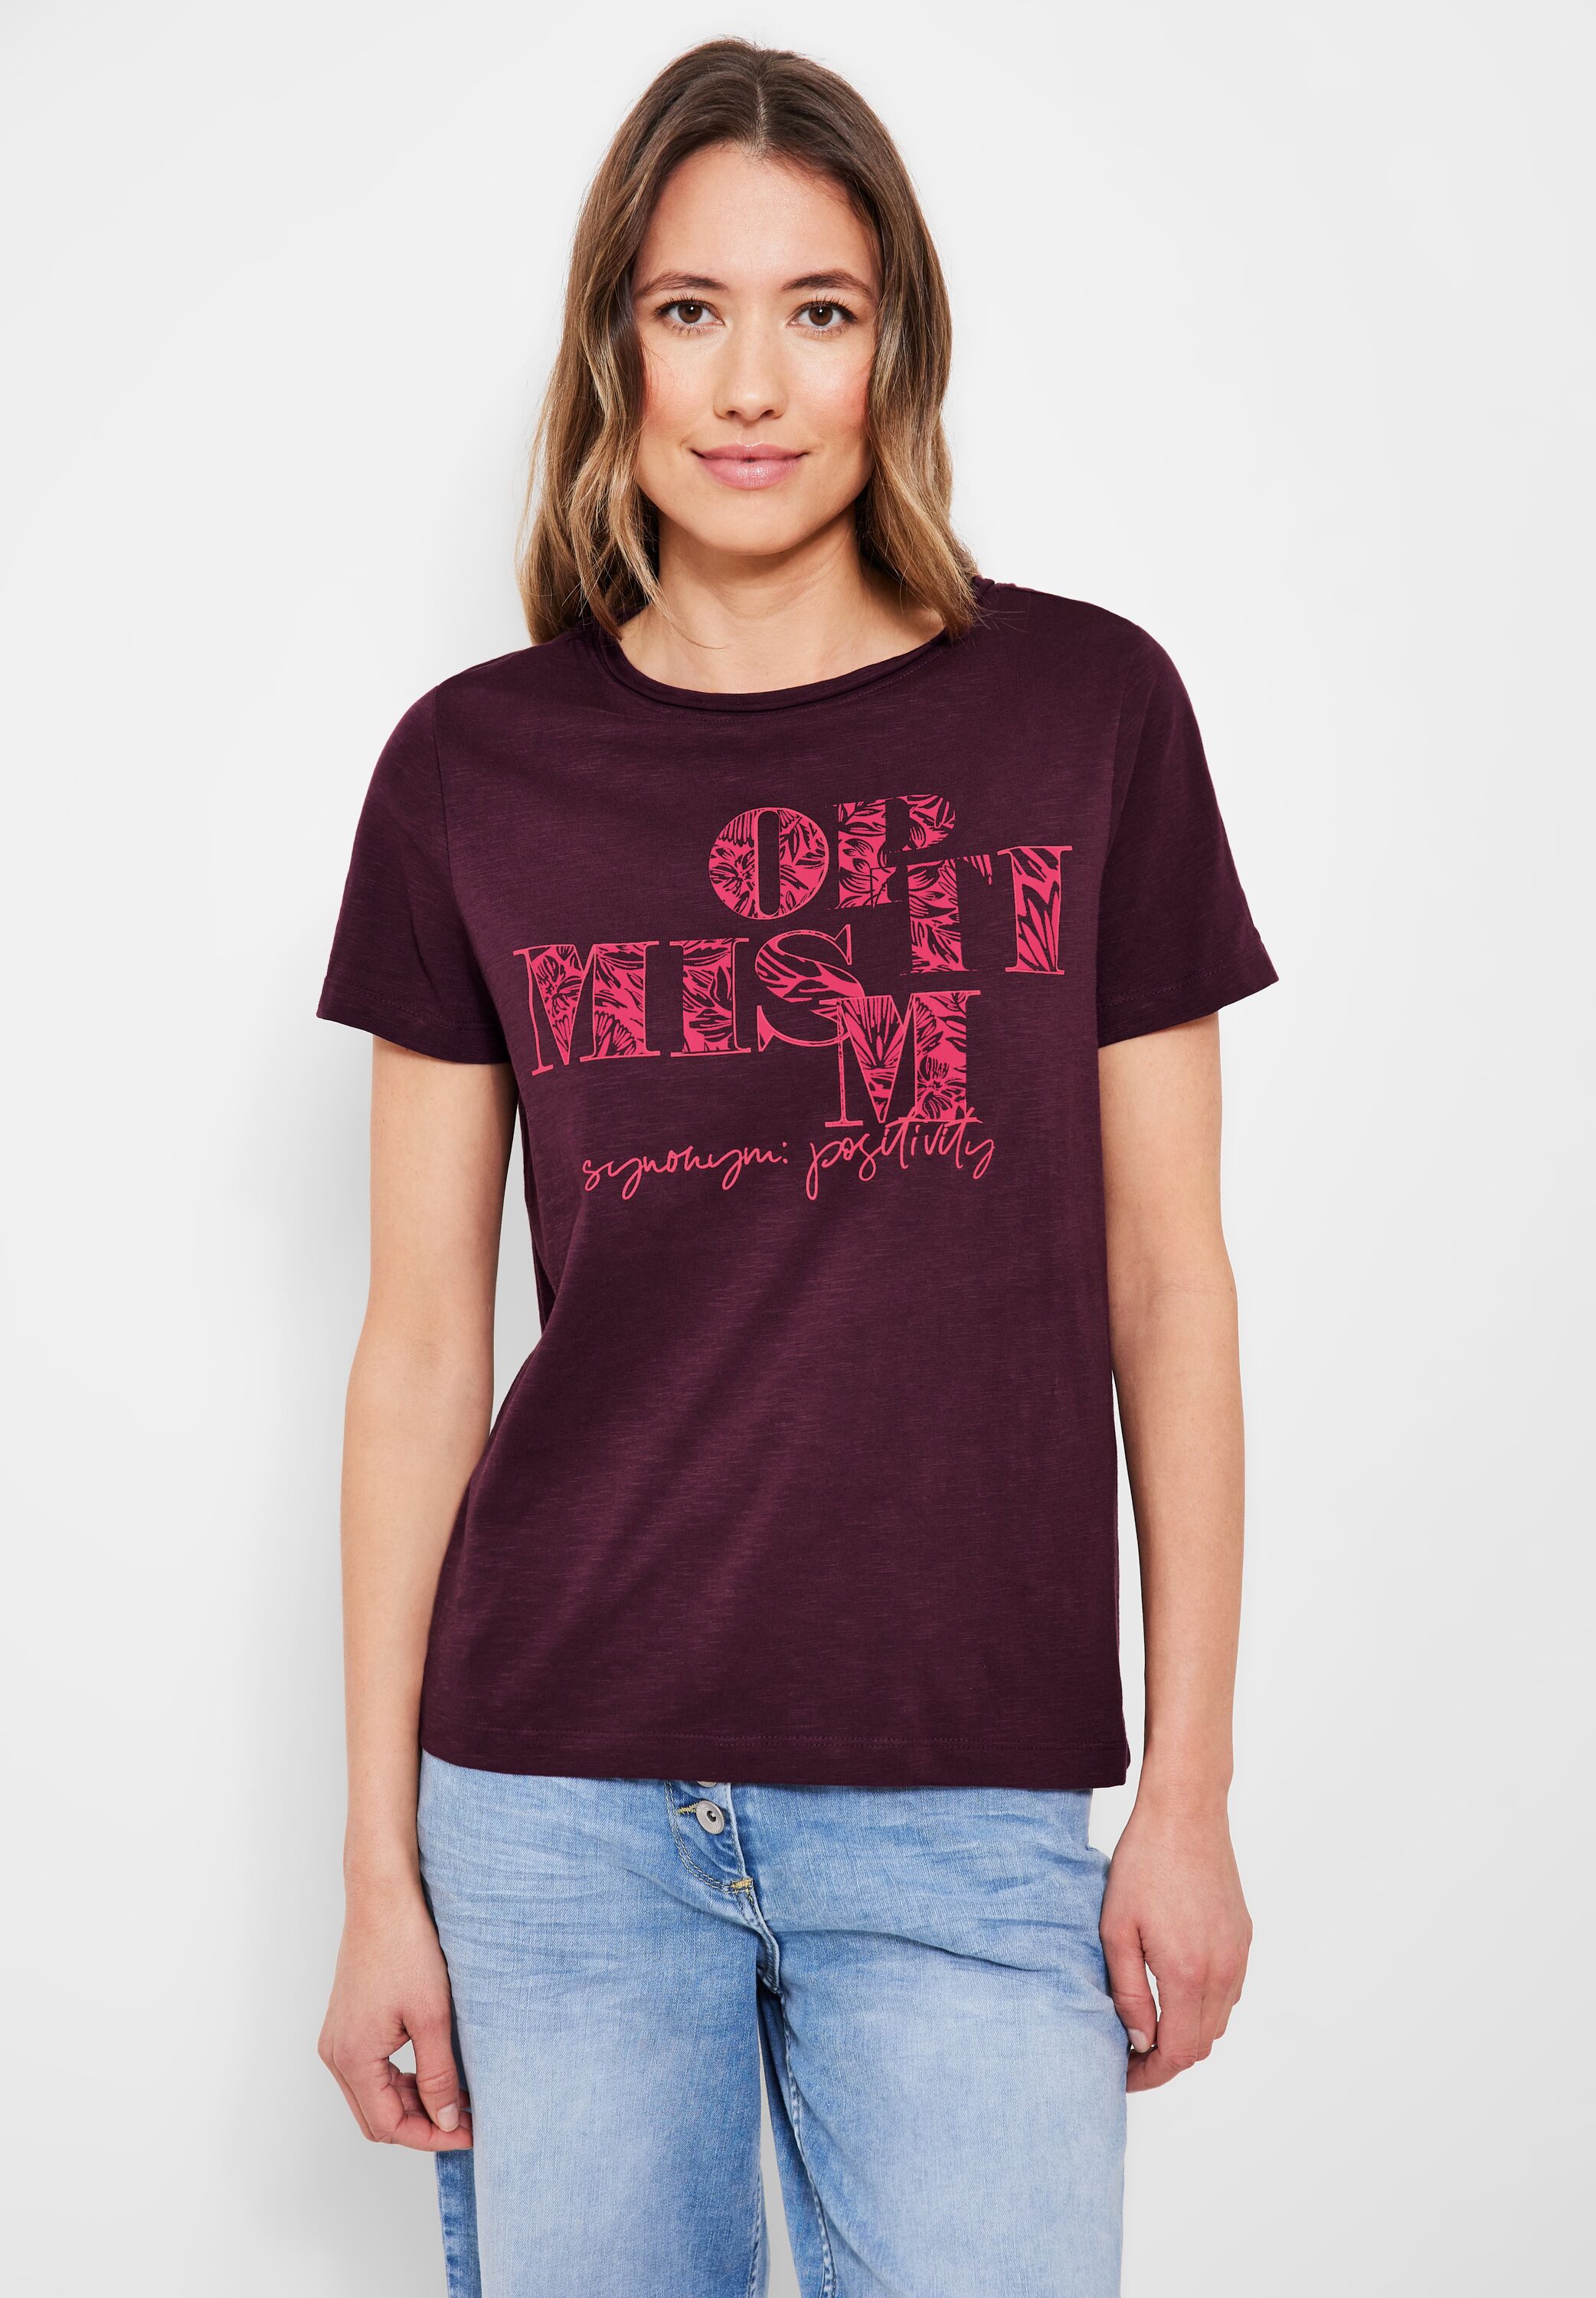 CECIL T-Shirt in Wineberry Red im SALE reduziert B319637-34918 - CONCEPT  Mode